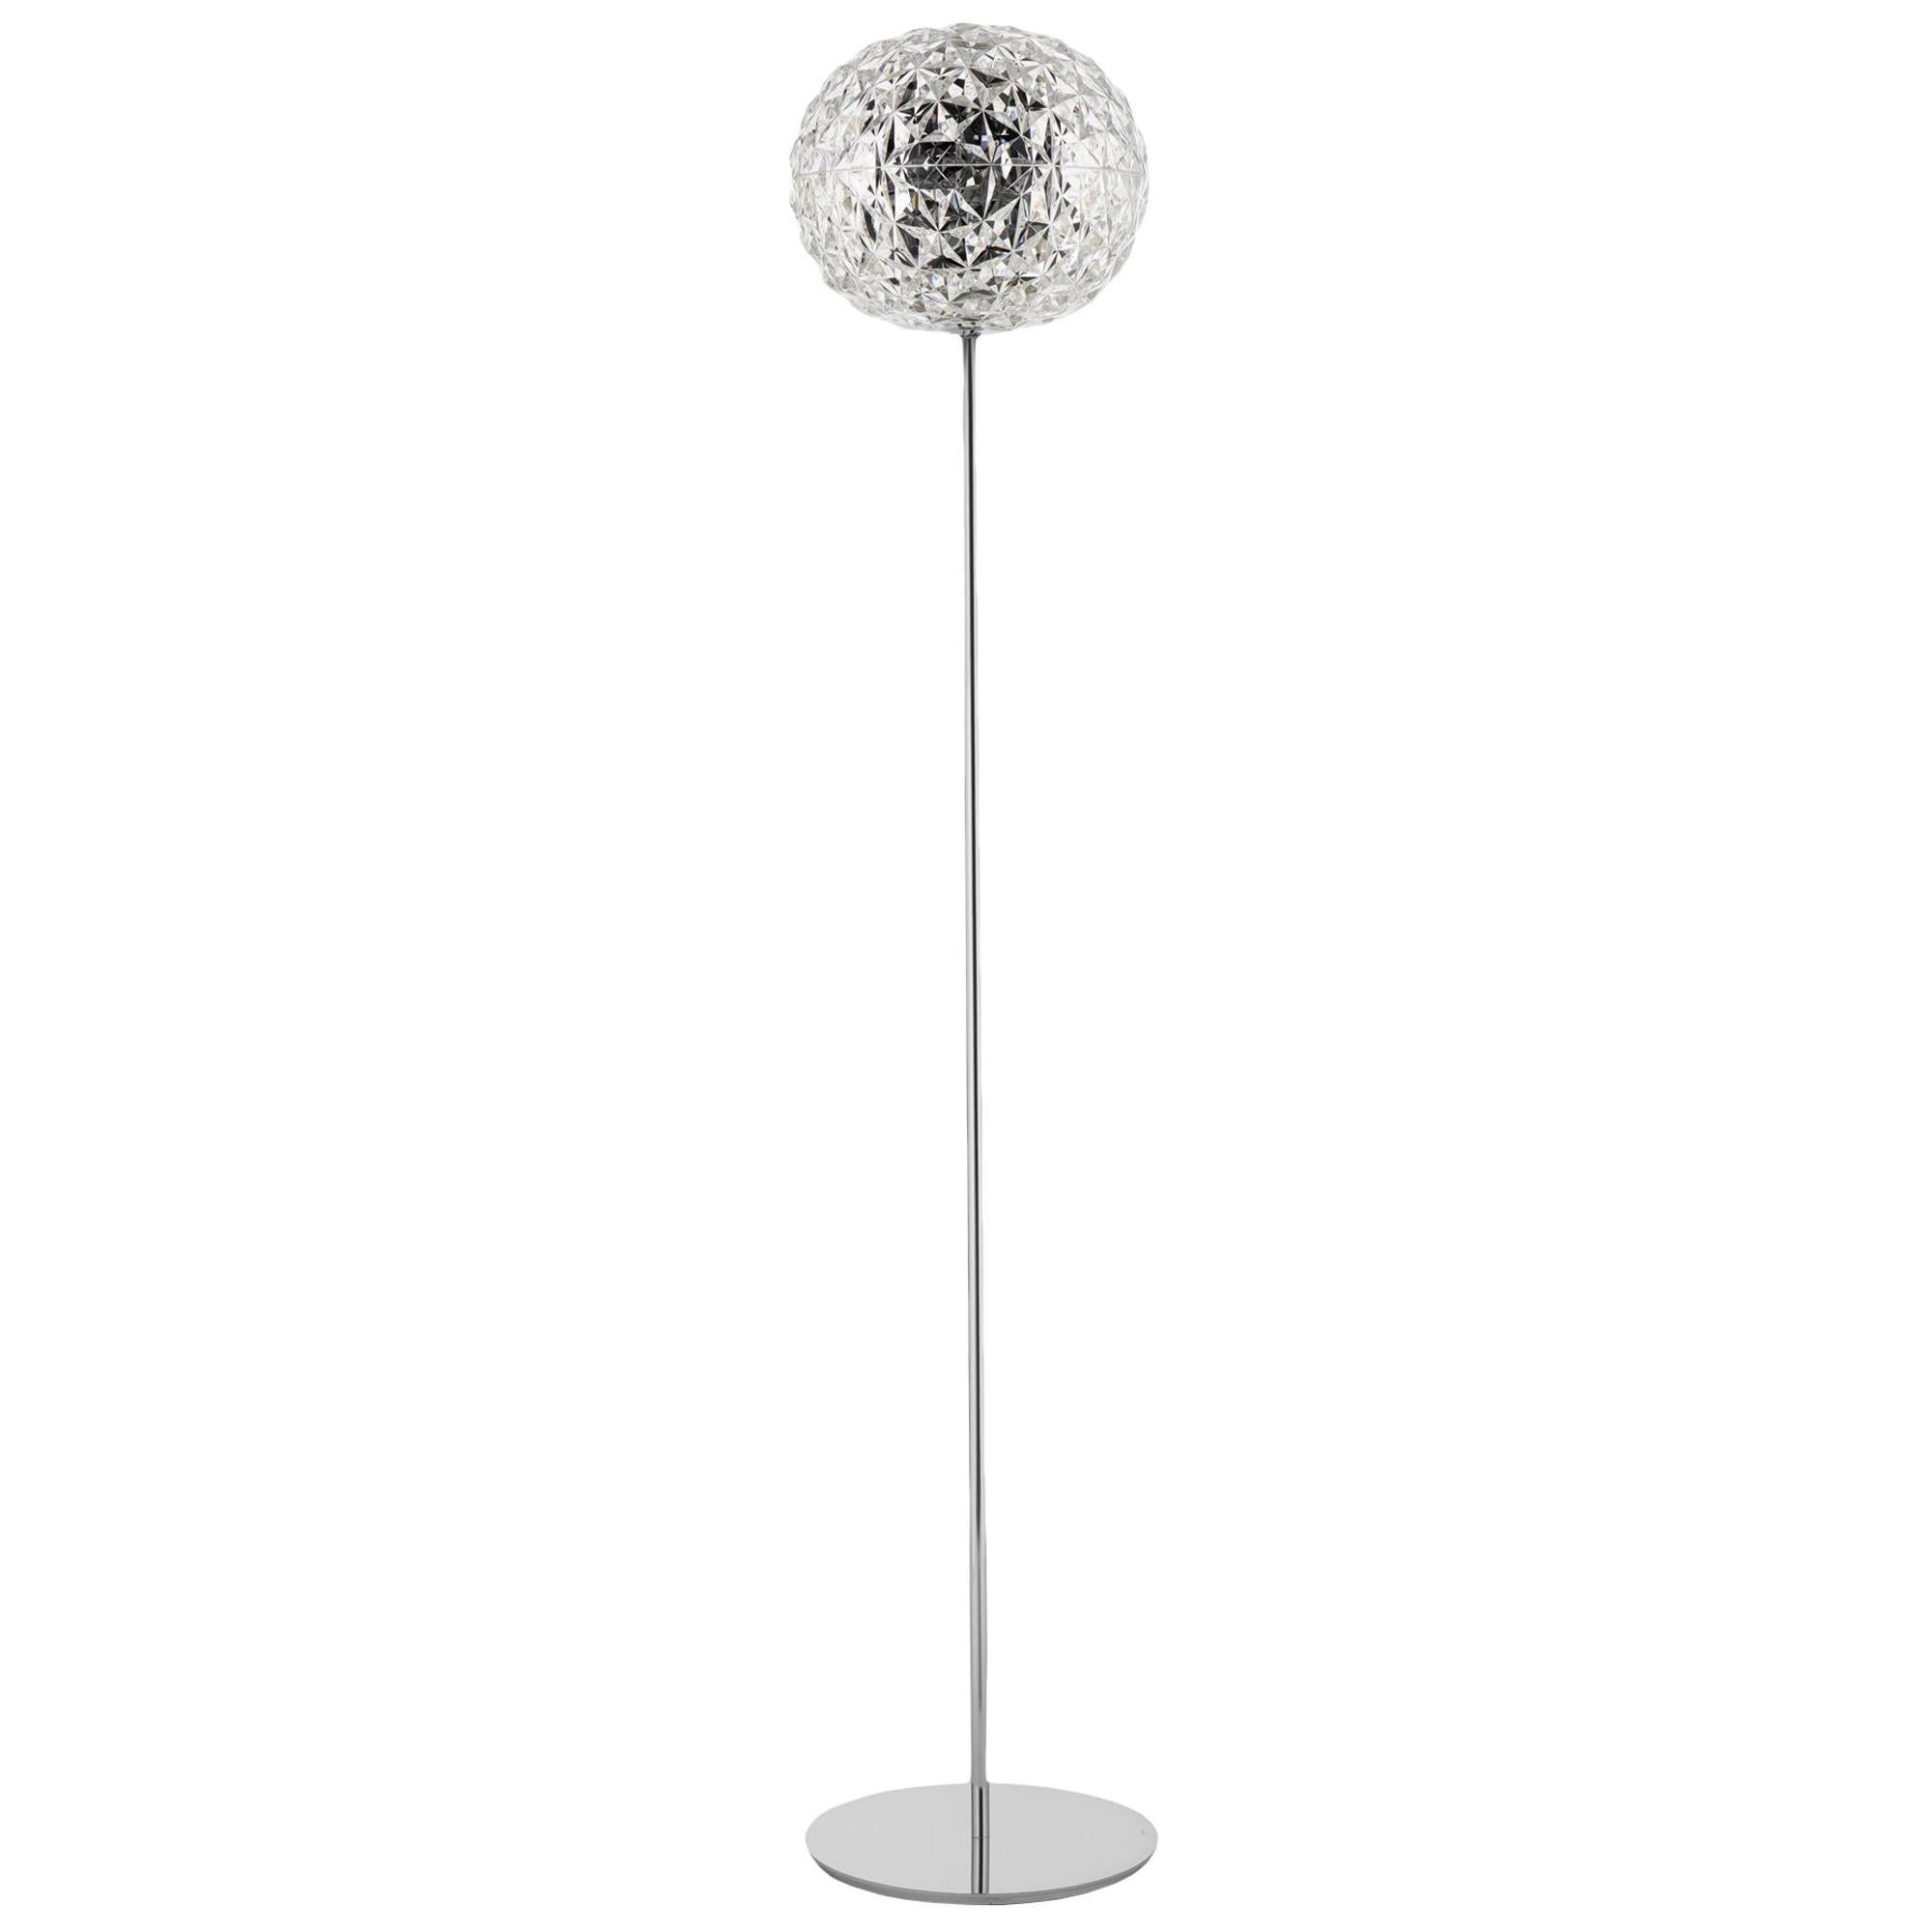 Kartell Short Planet Floor Lamp in Crystal by Tokujin Yoshioka For Sale